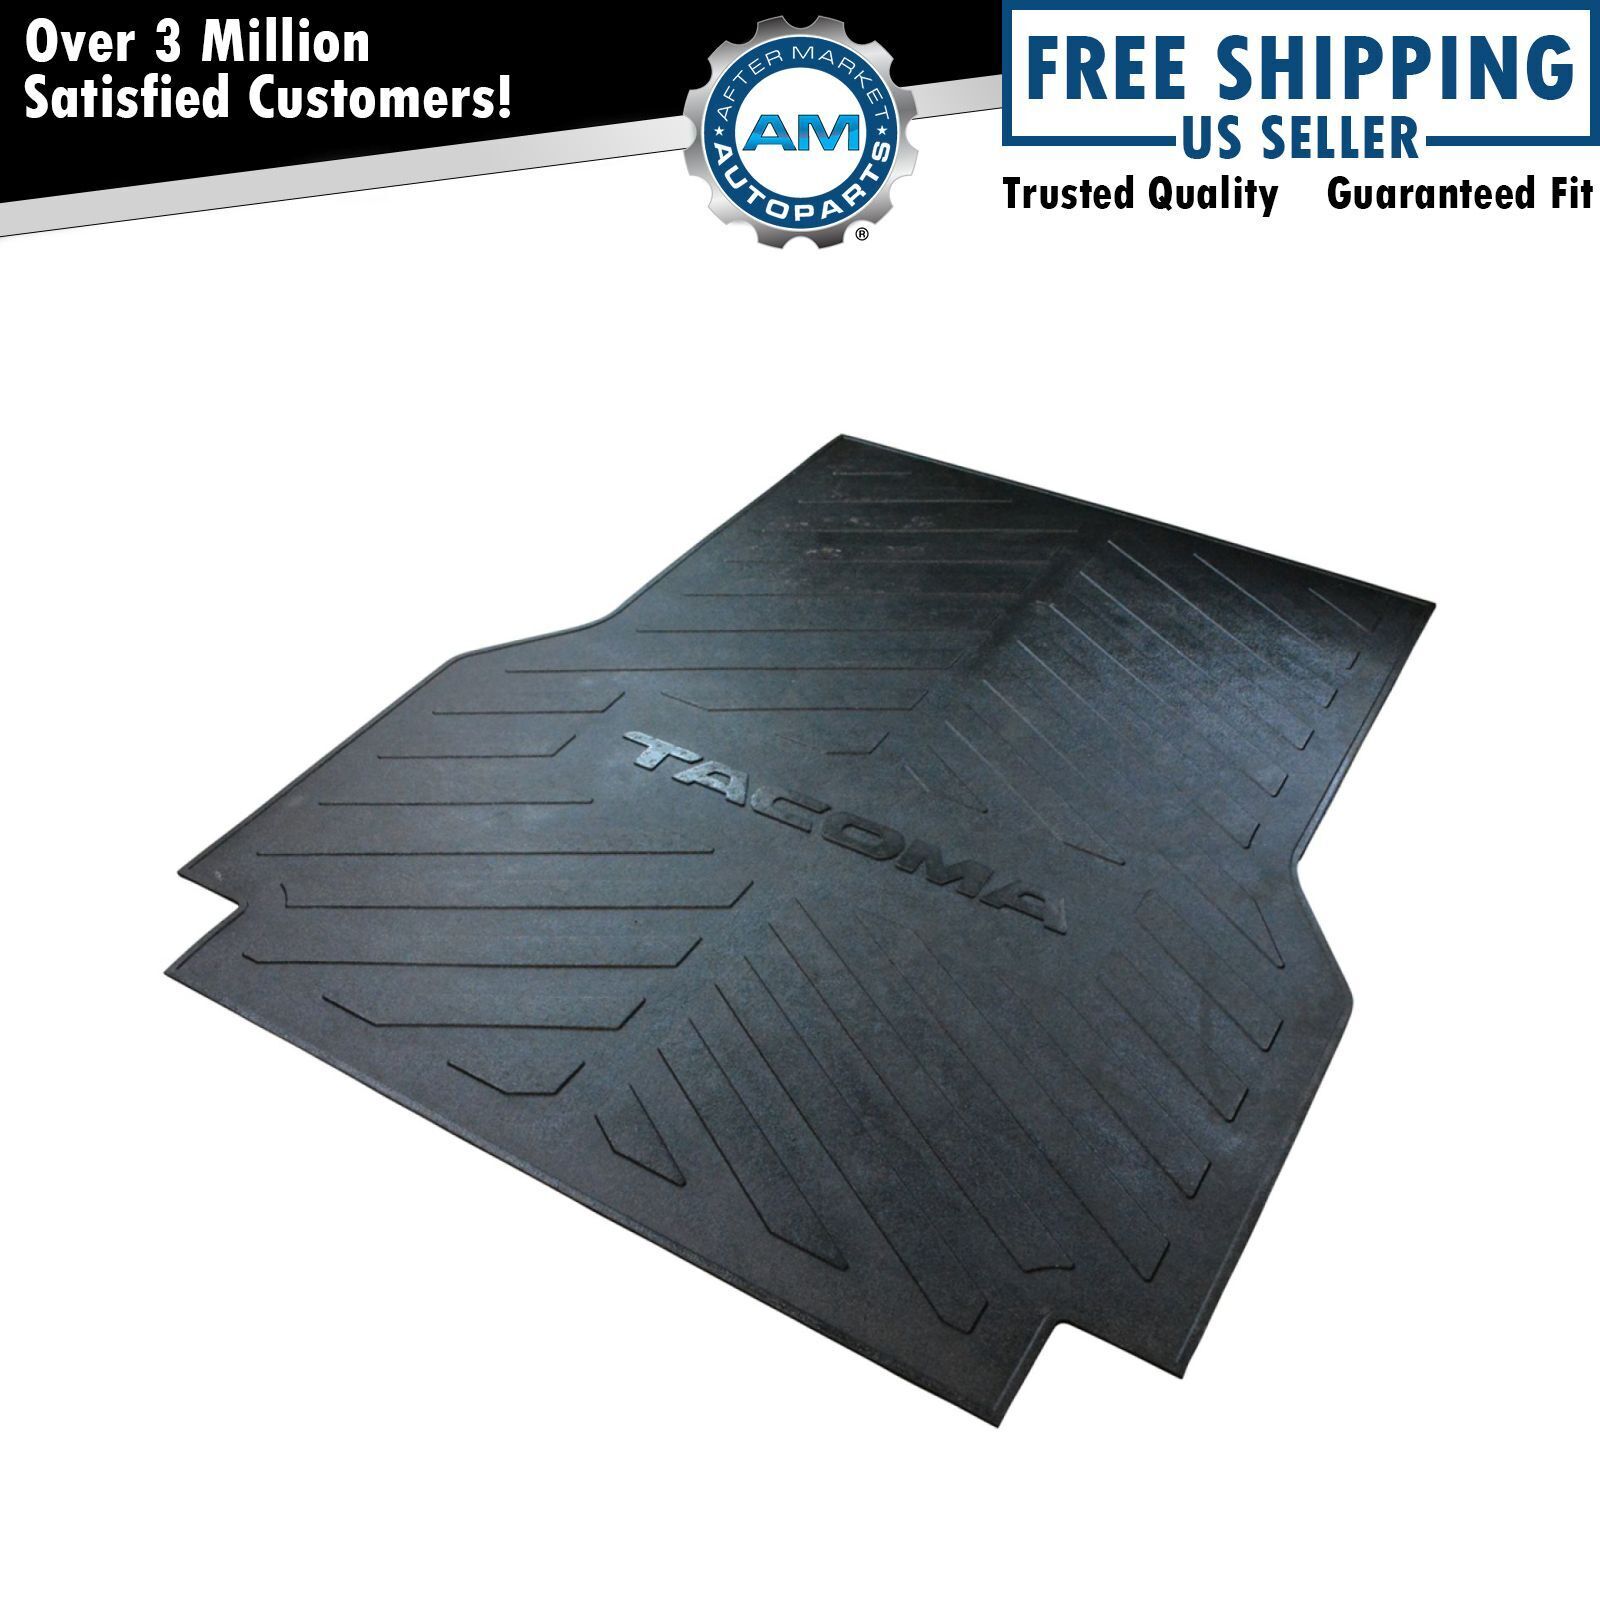 OEM Bed Mat Liner Molded Rubber for Toyota Tacoma 5 Foot Short Bed Brand New